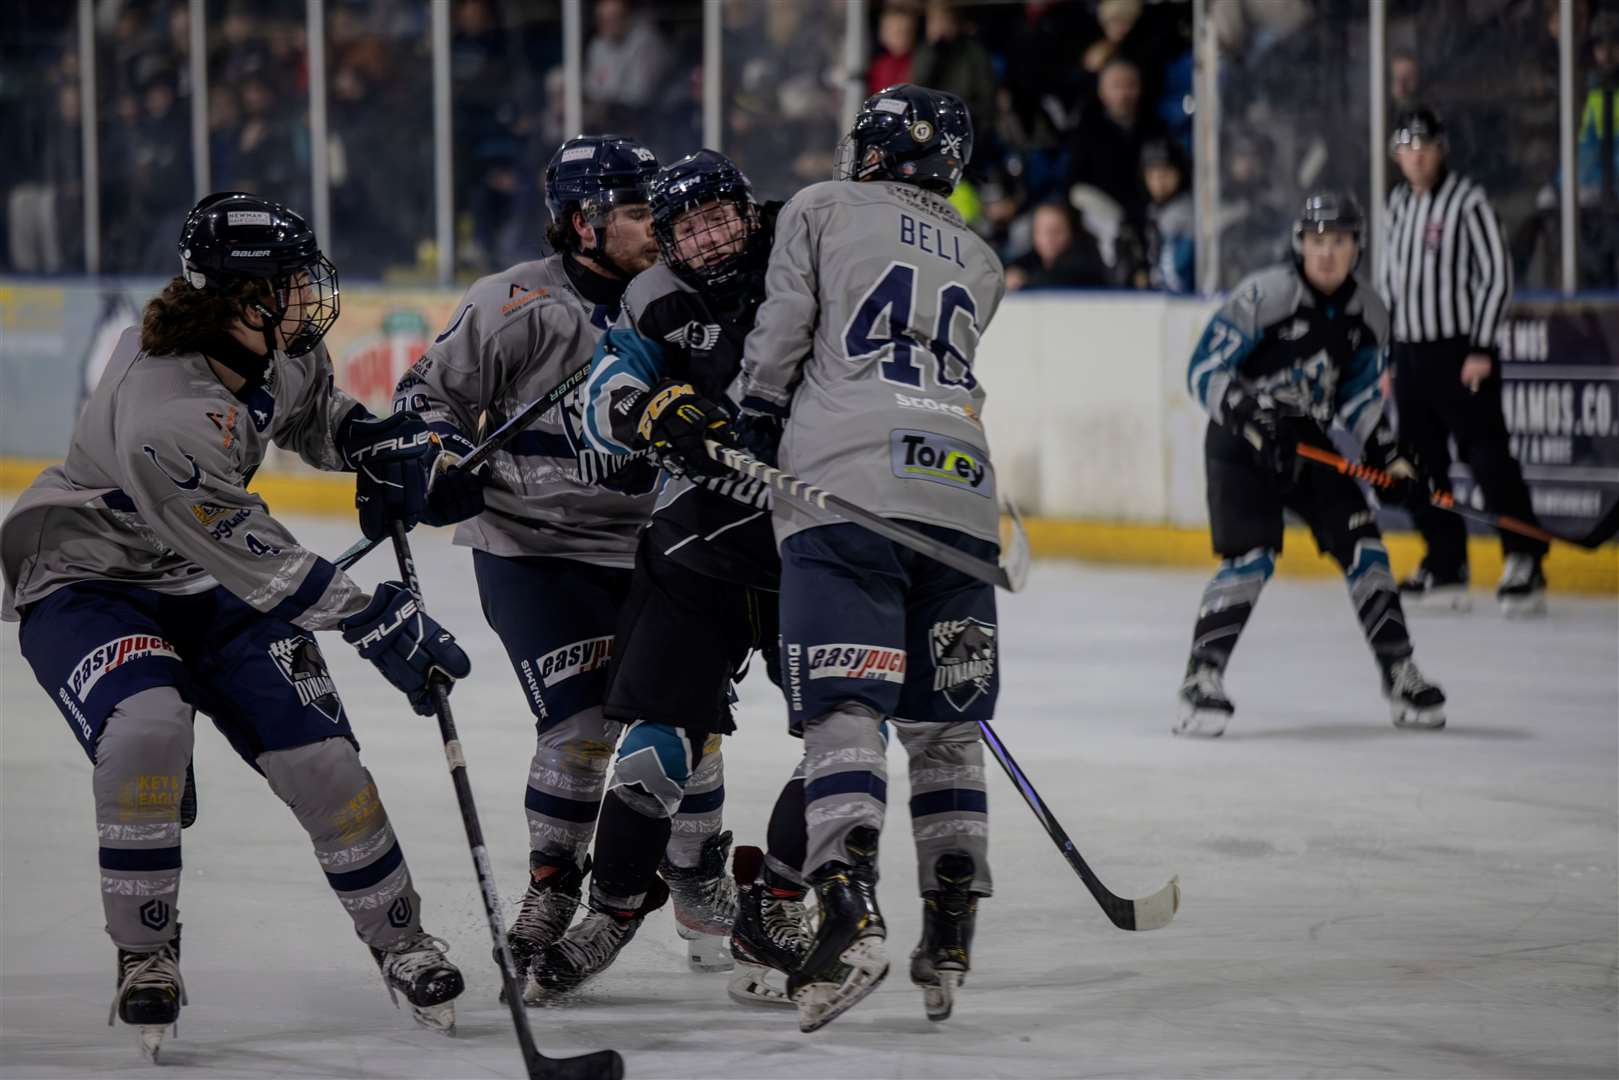 Matthew Bell in the thick of it for the Invicta Dynamos against MK Thunder Picture: David Trevallion